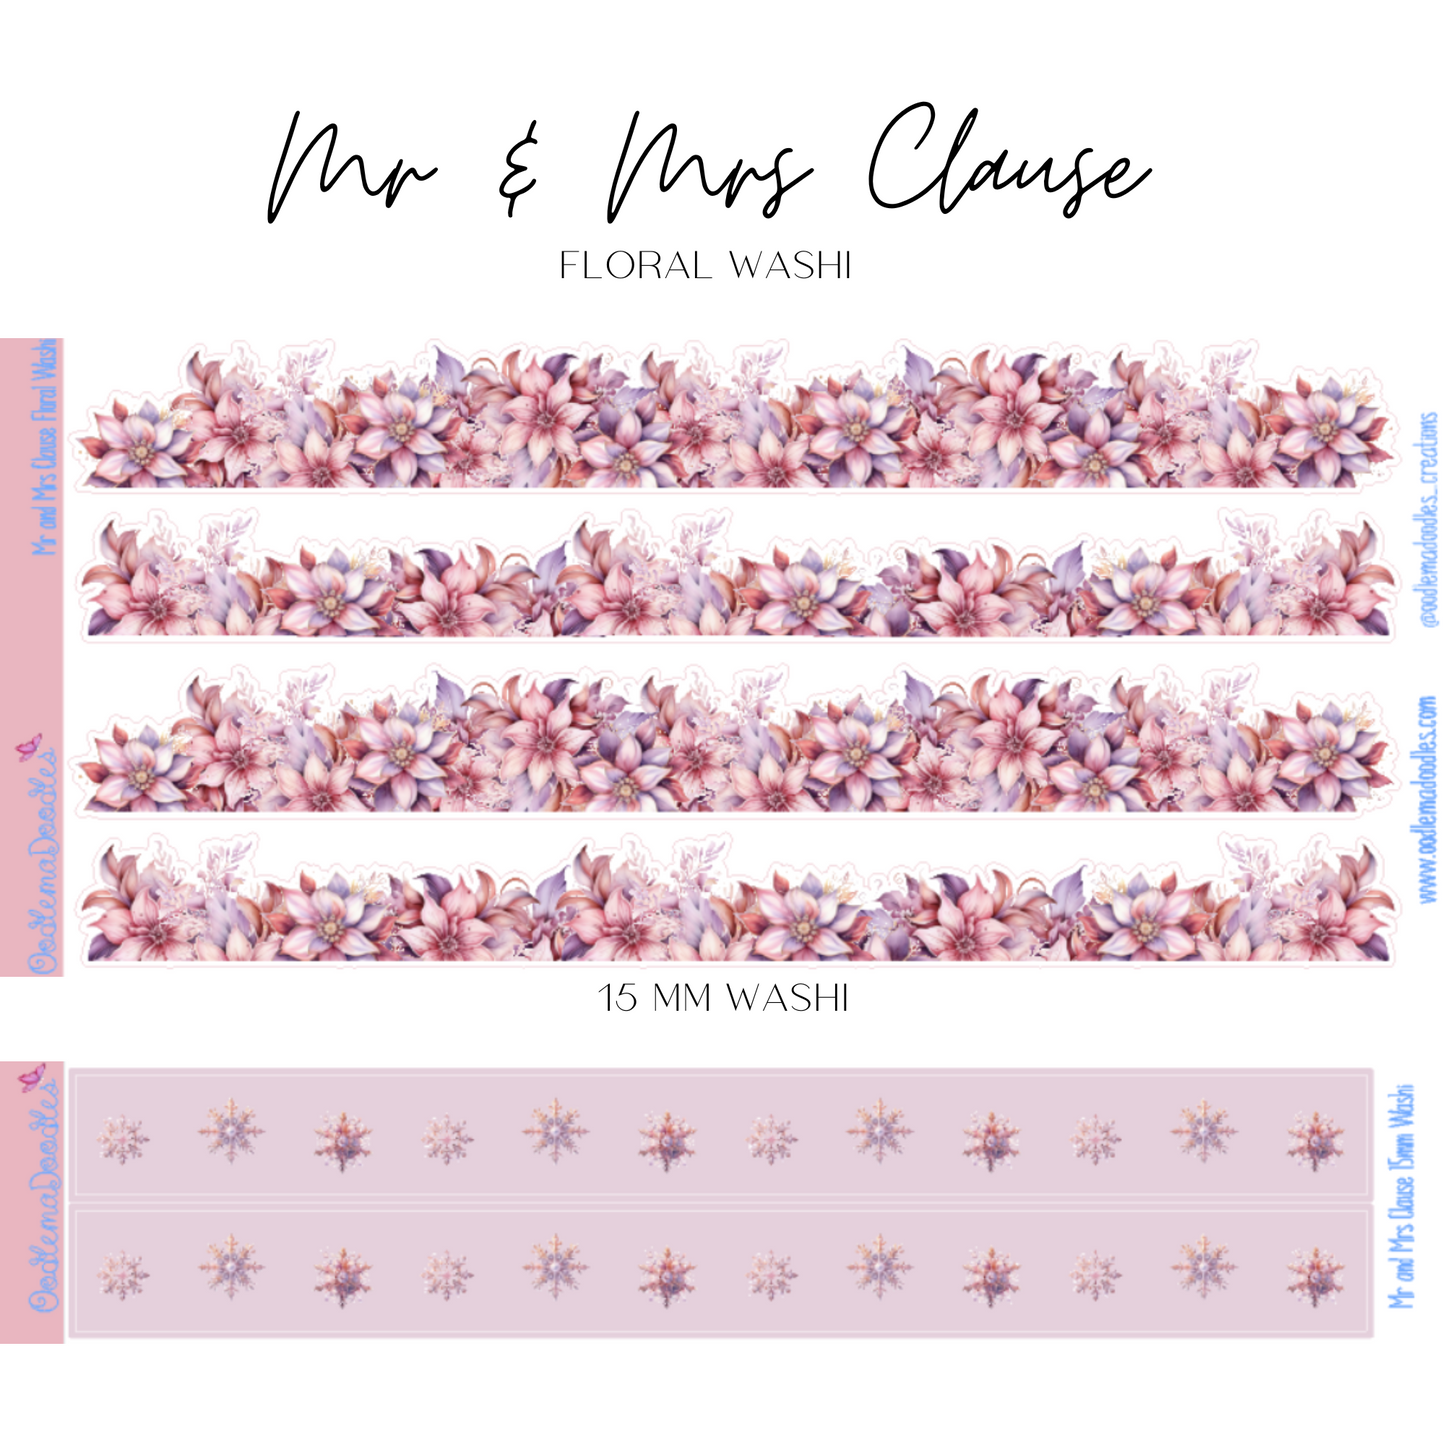 Mr and Mrs Clause Addon & Extra Washi Options